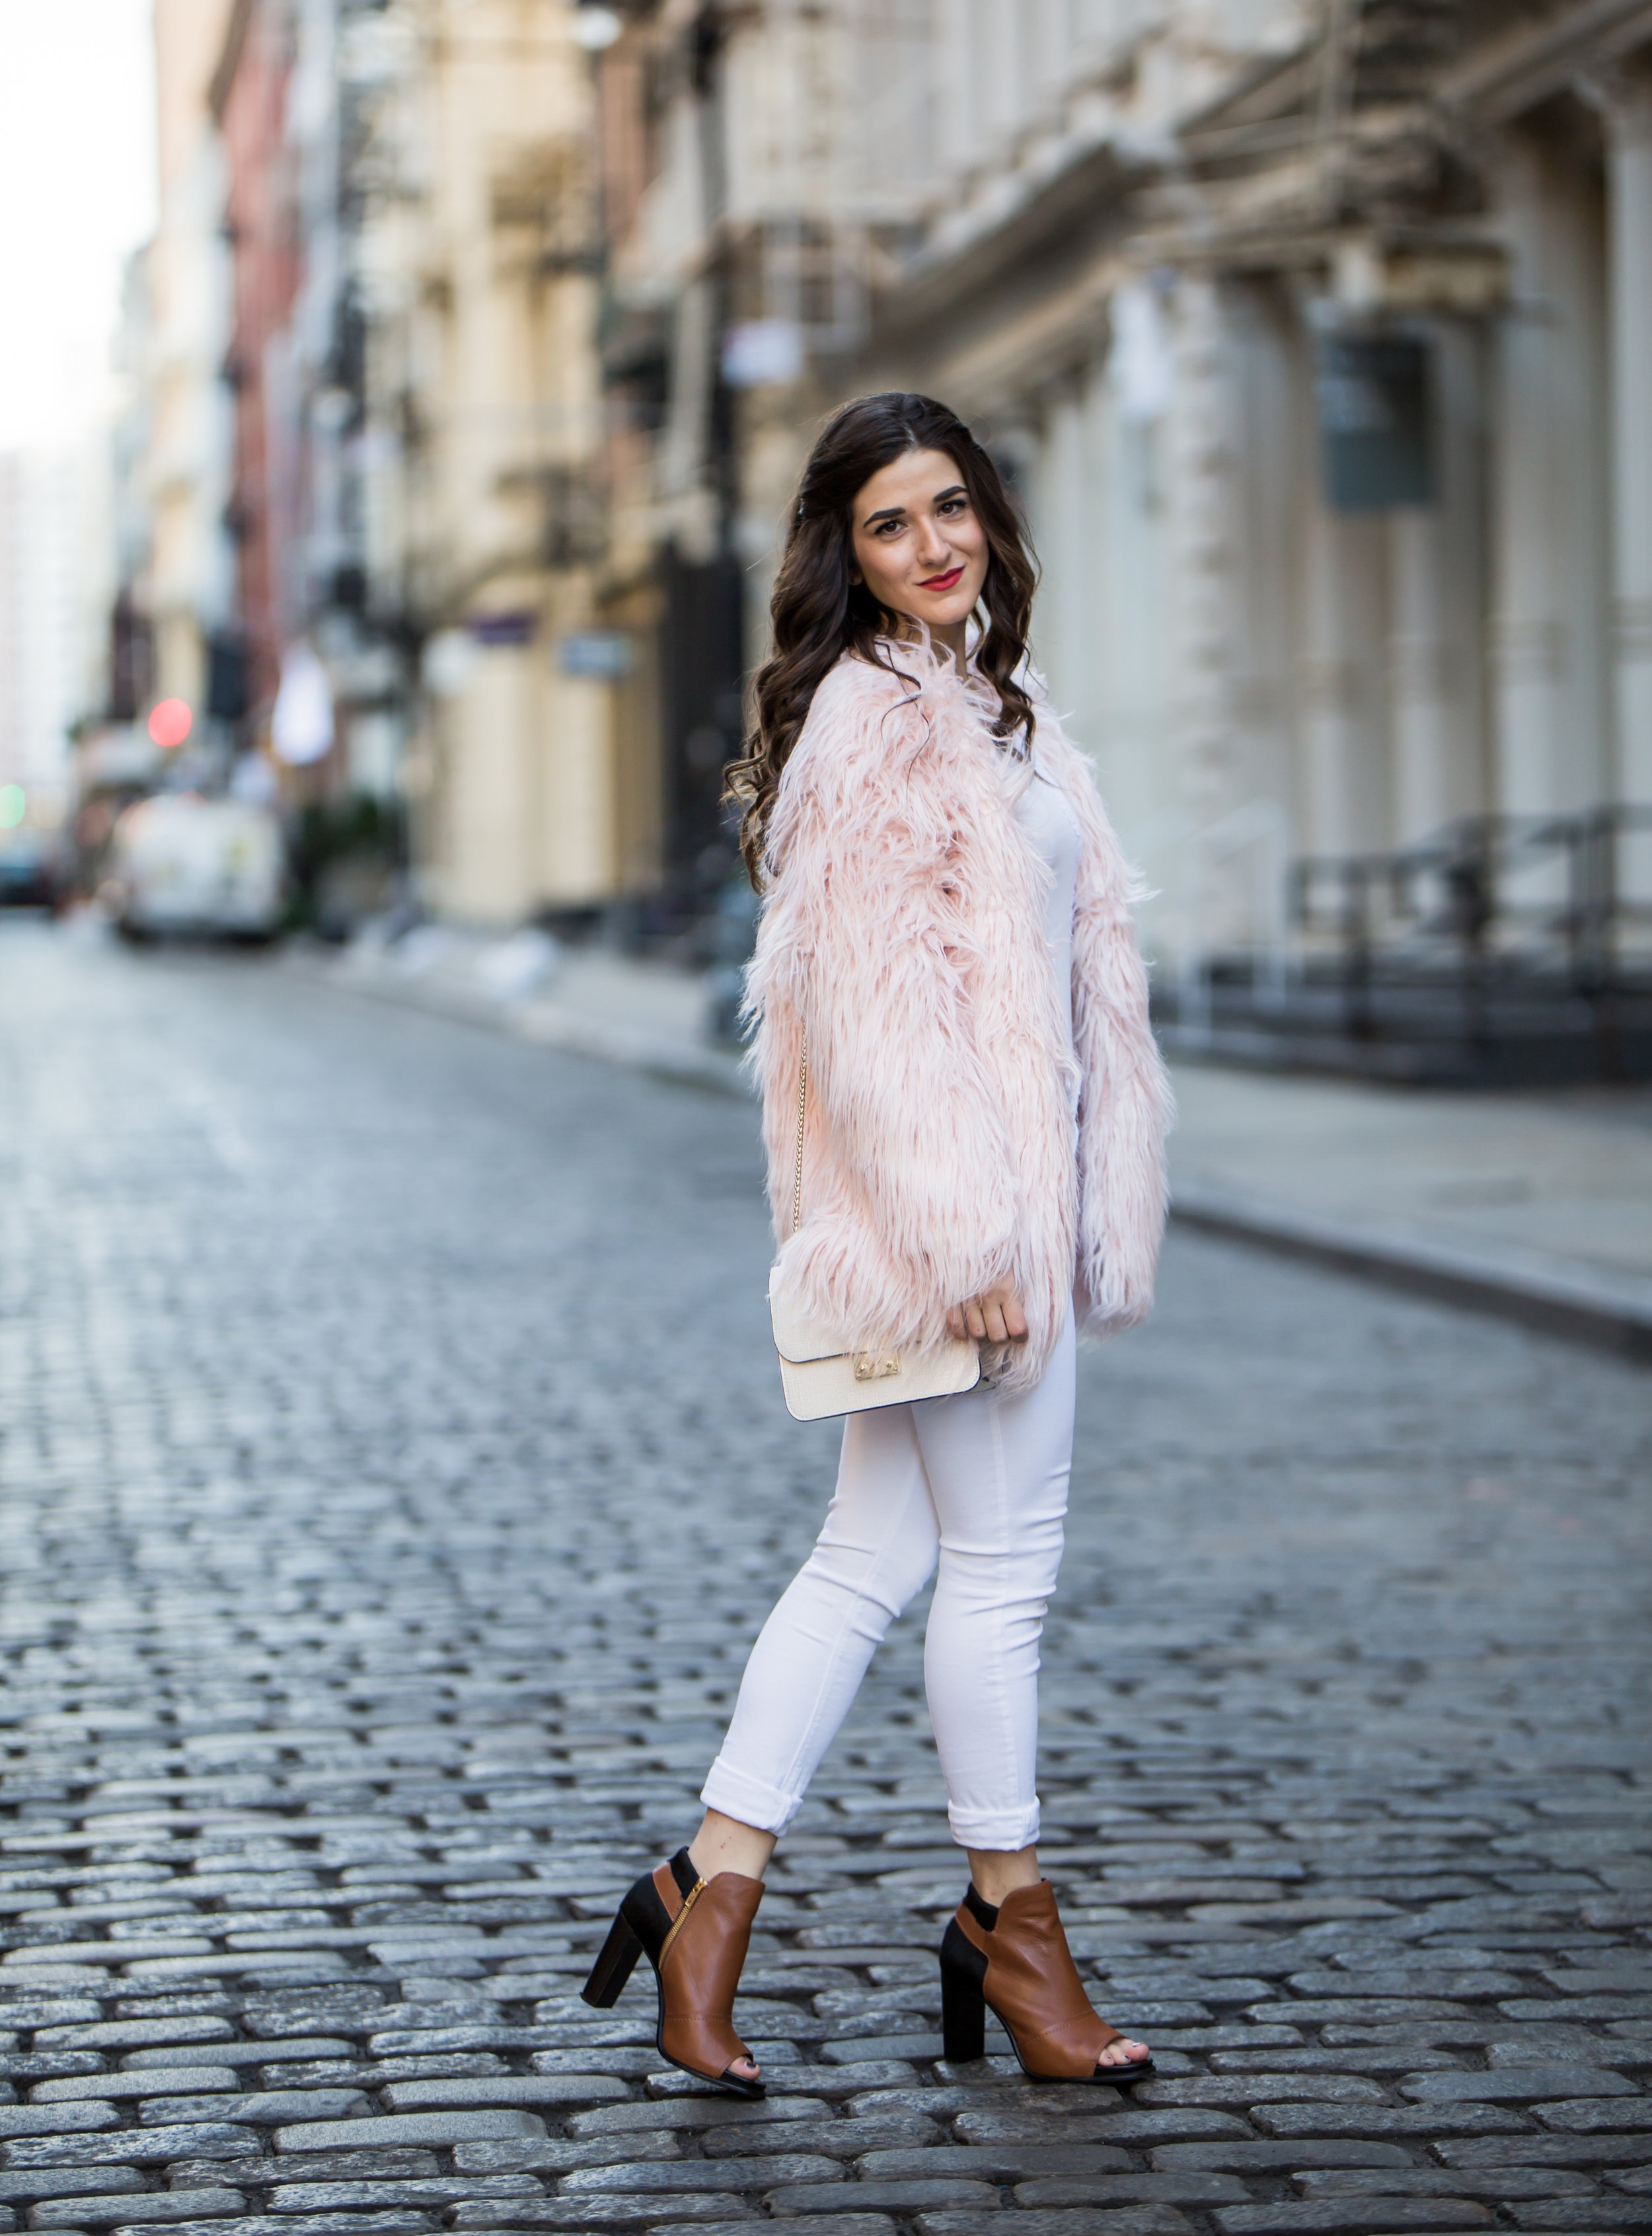 Pink Faux Fur Jacket White Jeans The Best Career Advice Esther Santer Fashion Blog NYC Street Style Blogger Outfit OOTD Trendy Winter Whites Henri Bendel Bag Tan Booties Girl Women Shop Sale Hair What To Wear Wearing Model Photoshoot Shoes Accessories.jpg